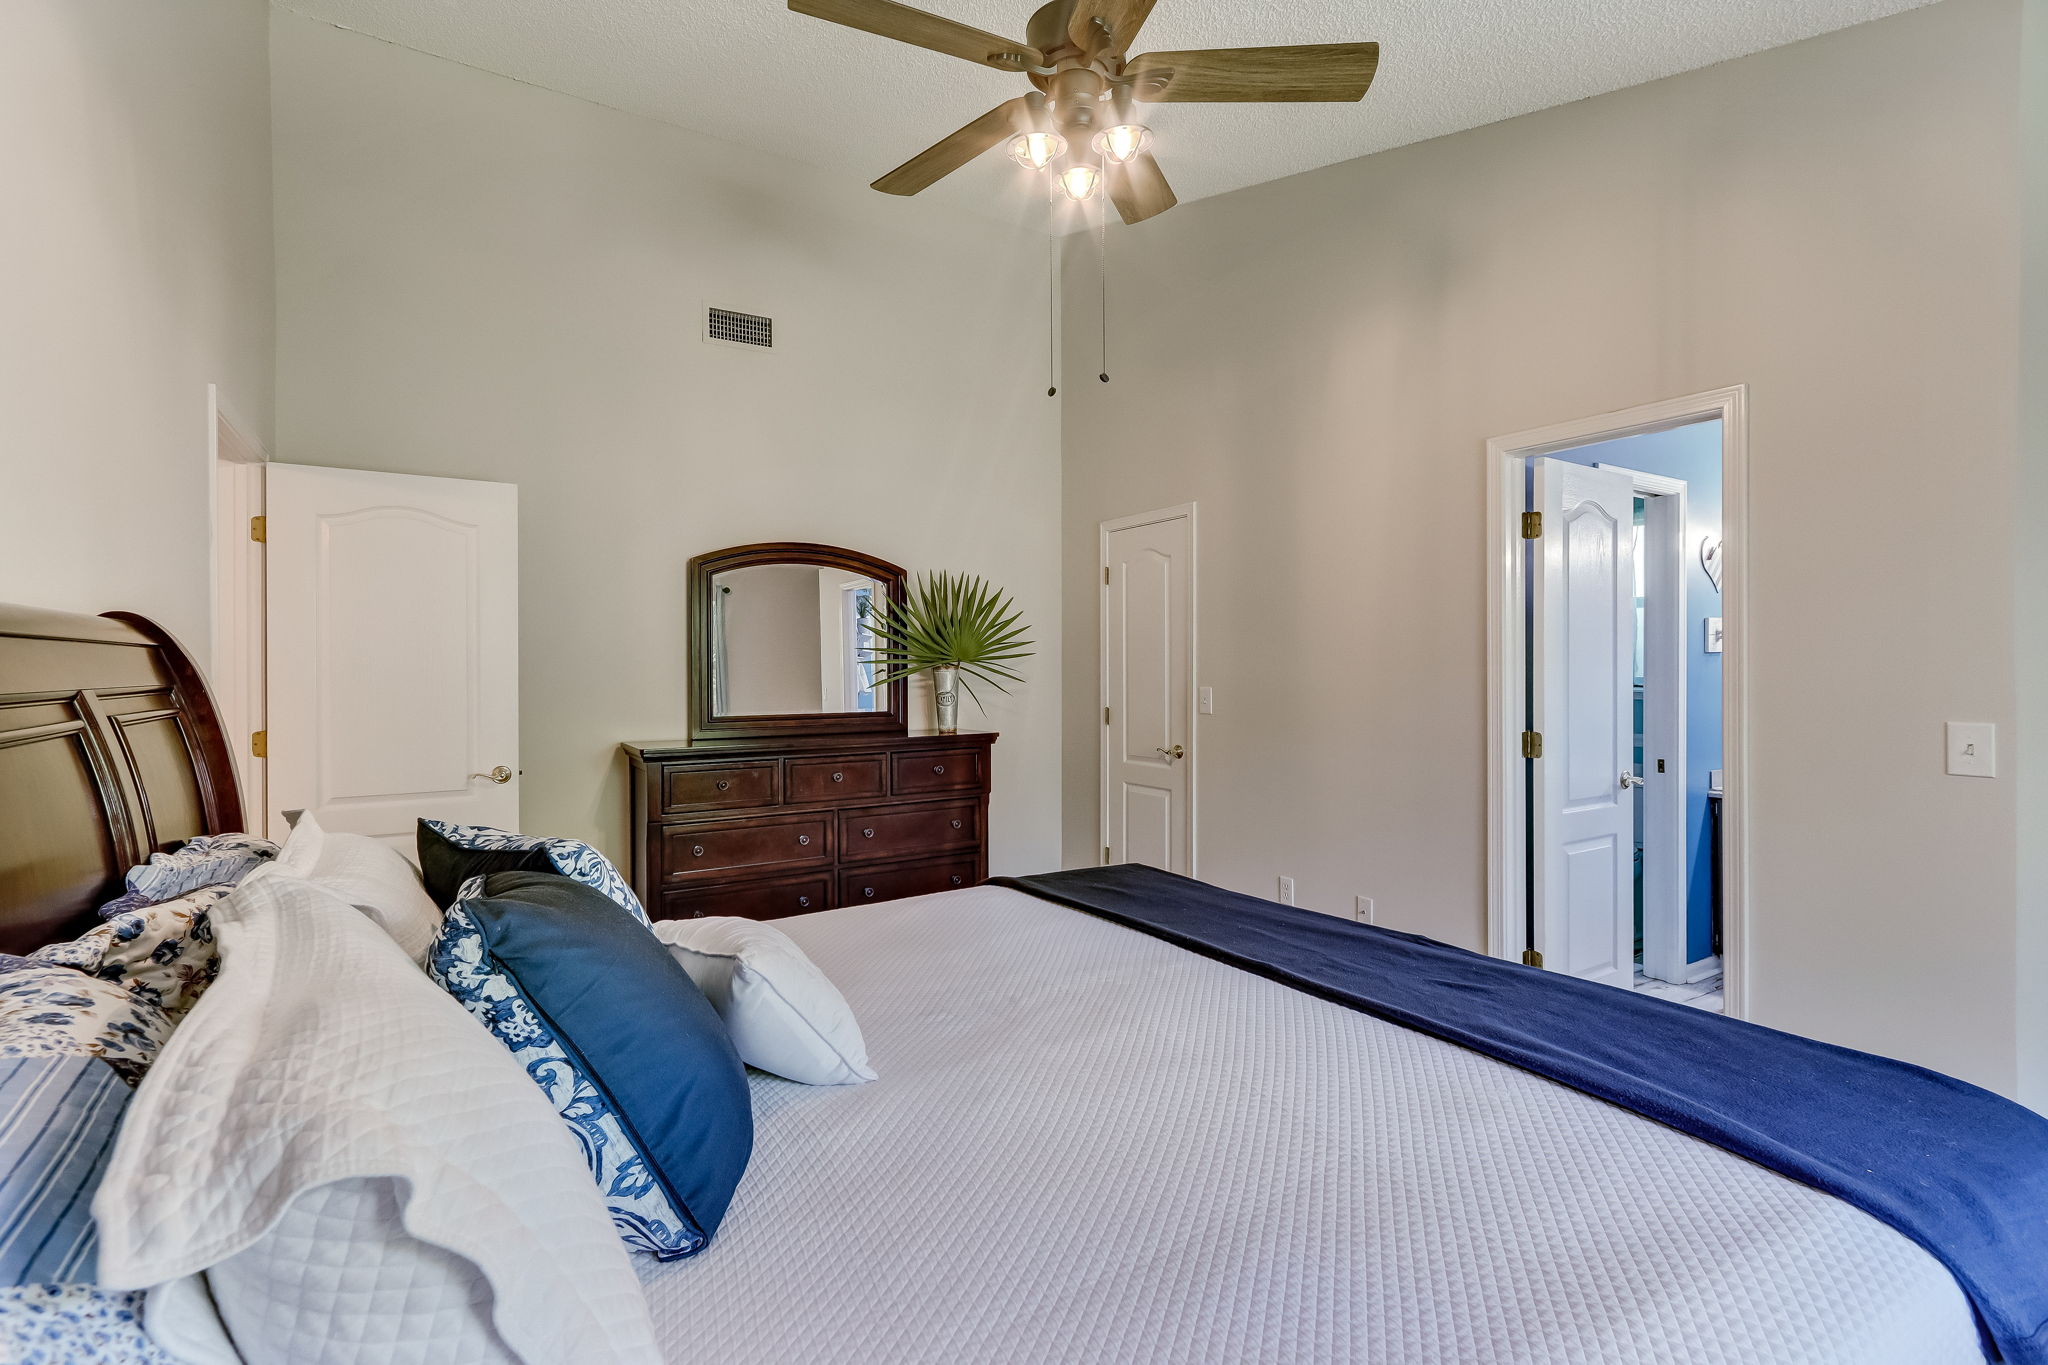 The master suite features a generously sized walk-in closet and bath.